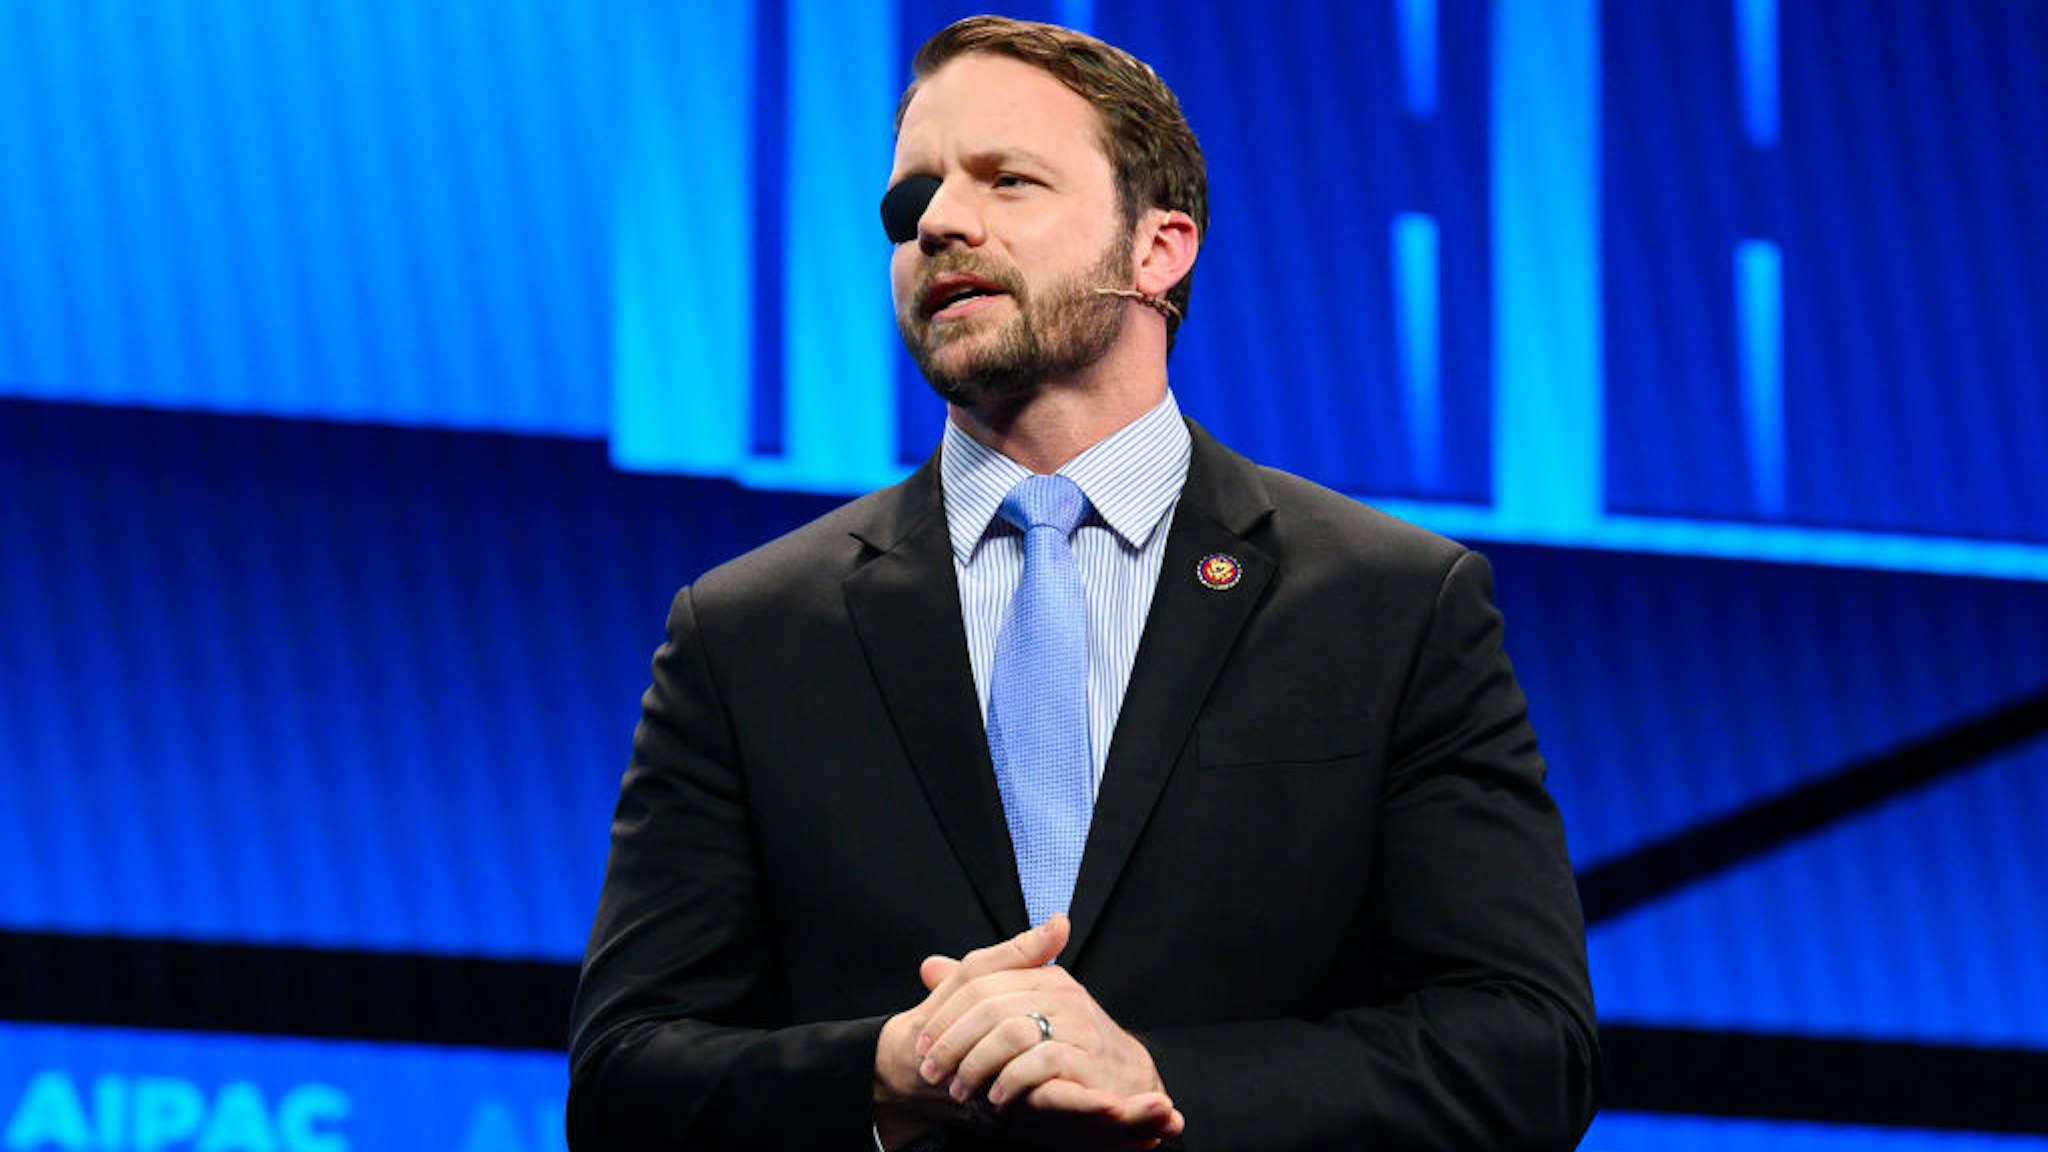 U.S. Representative Dan Crenshaw (R-TX) seen speaking during the American Israel Public Affairs Committee (AIPAC) Policy Conference in Washington, DC.